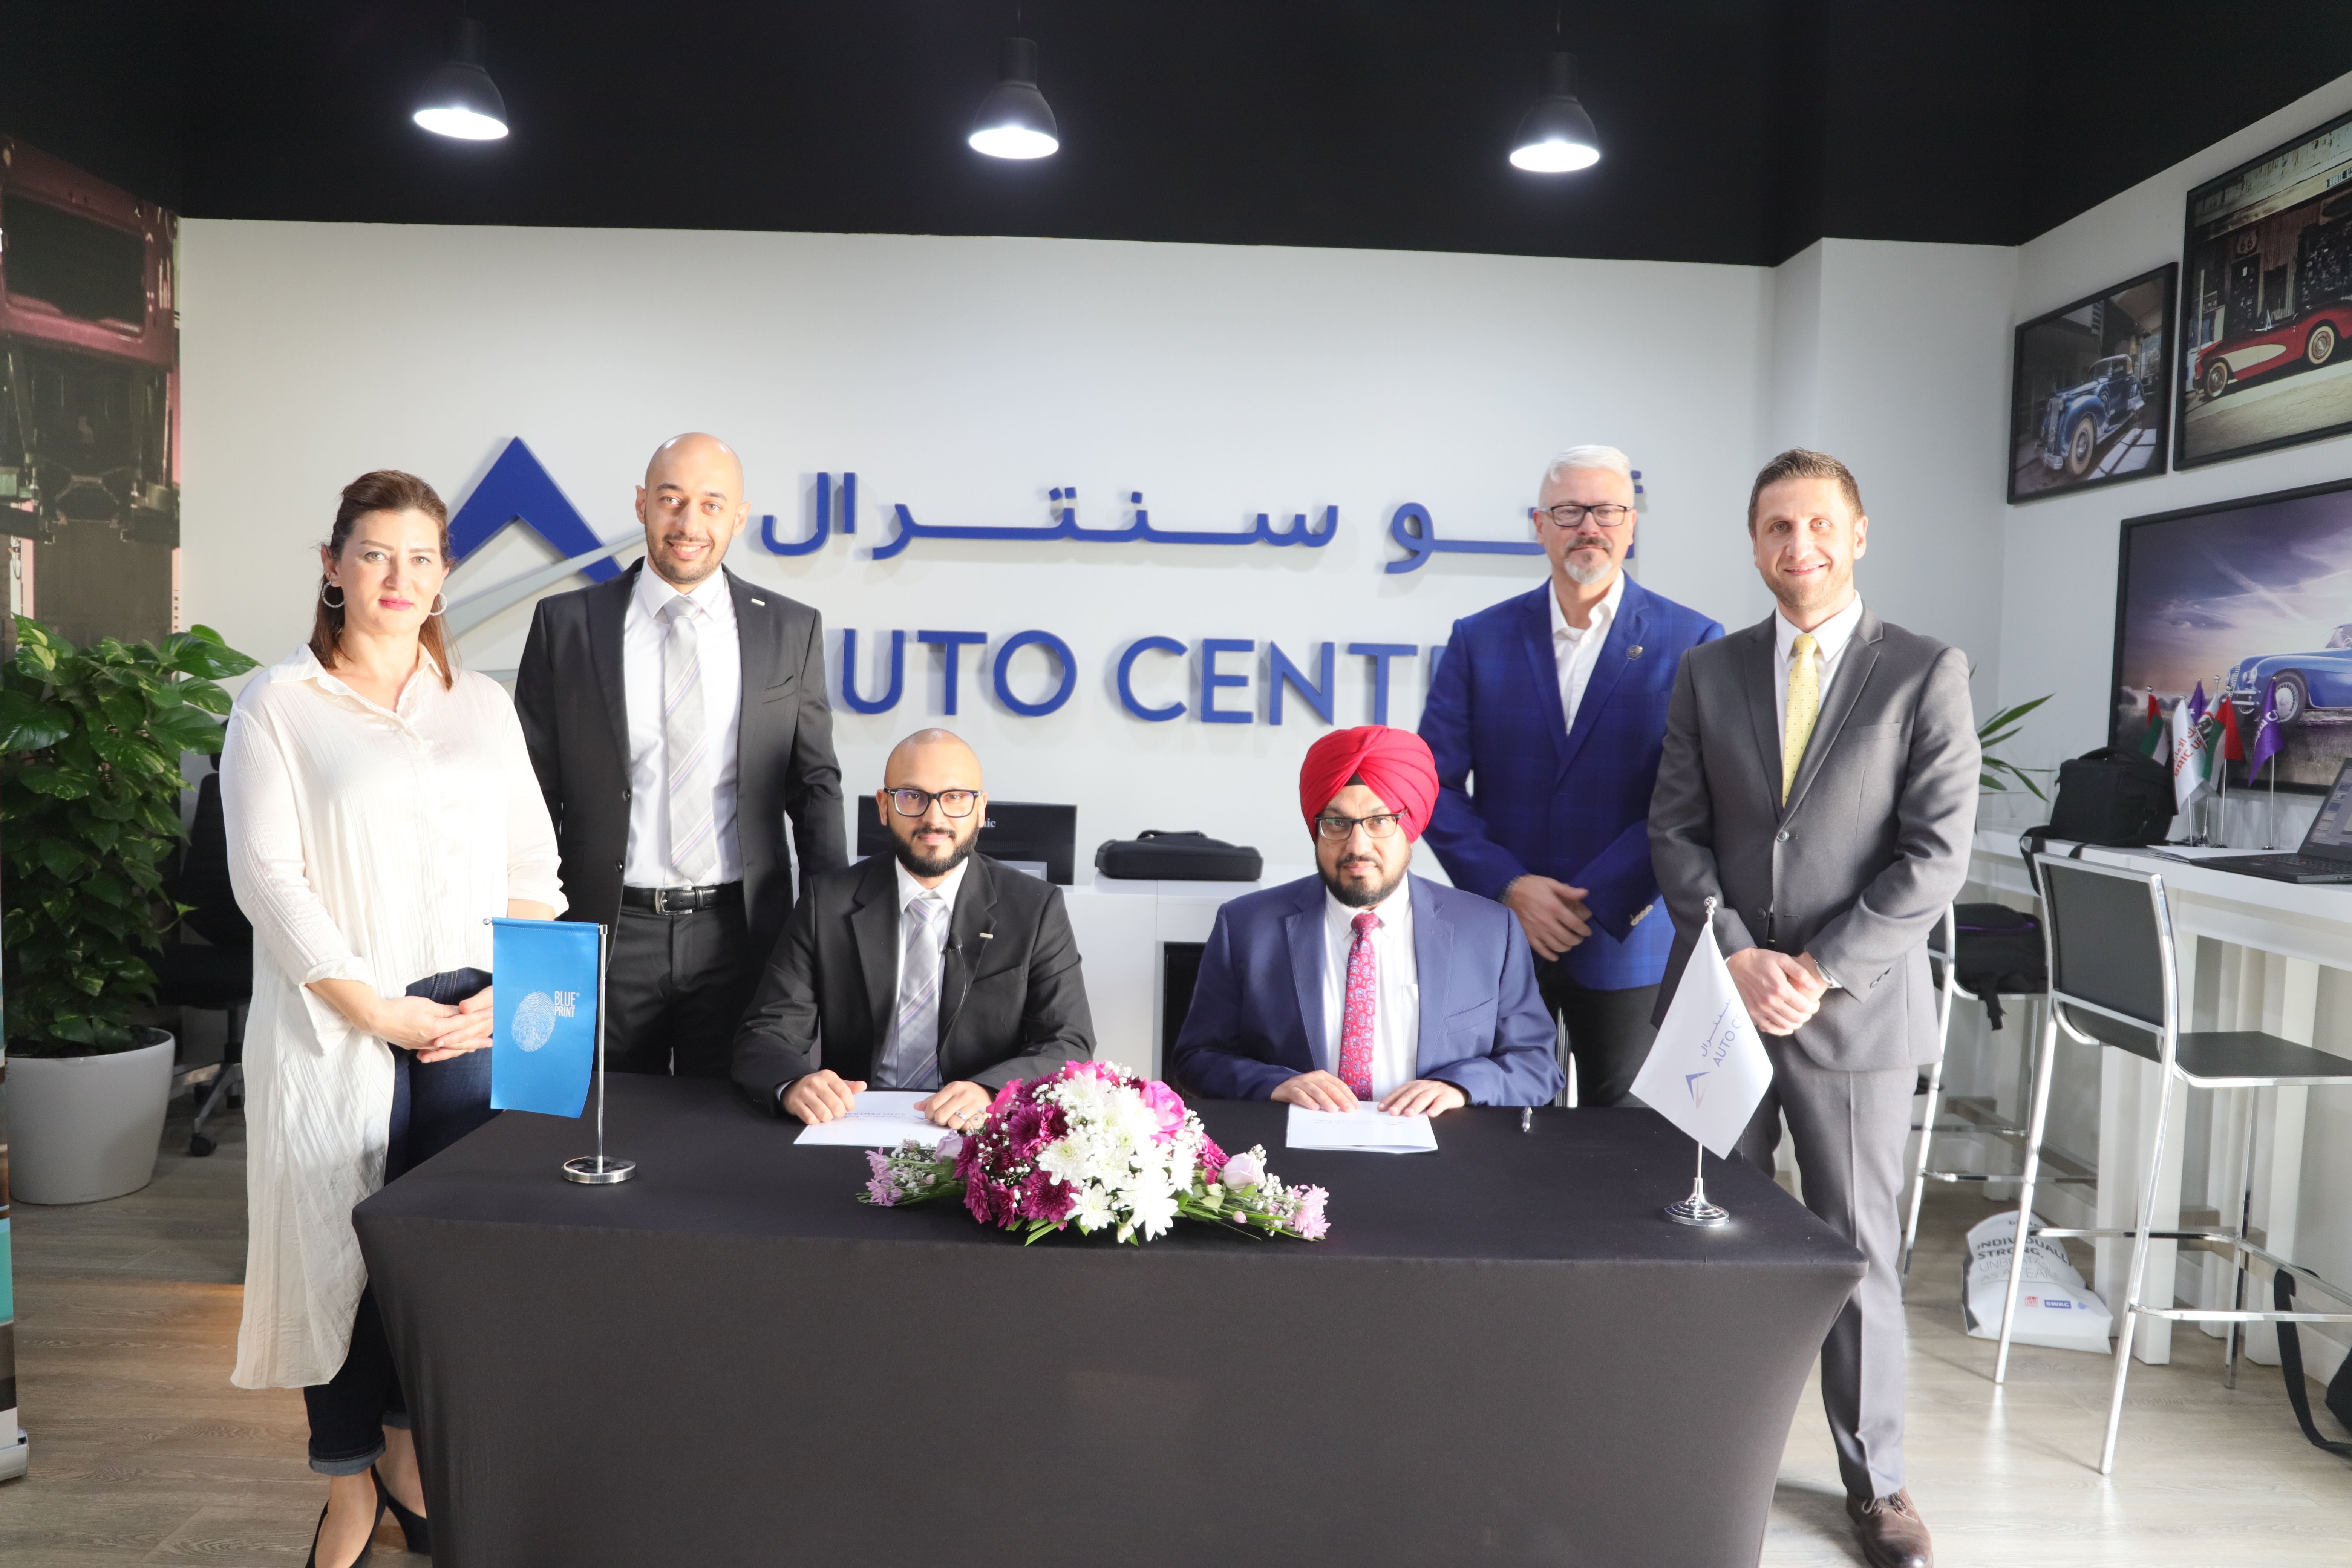 AutoCentral allies with Bilstein Group to provide technology-enabled car repair & maintenance solutions